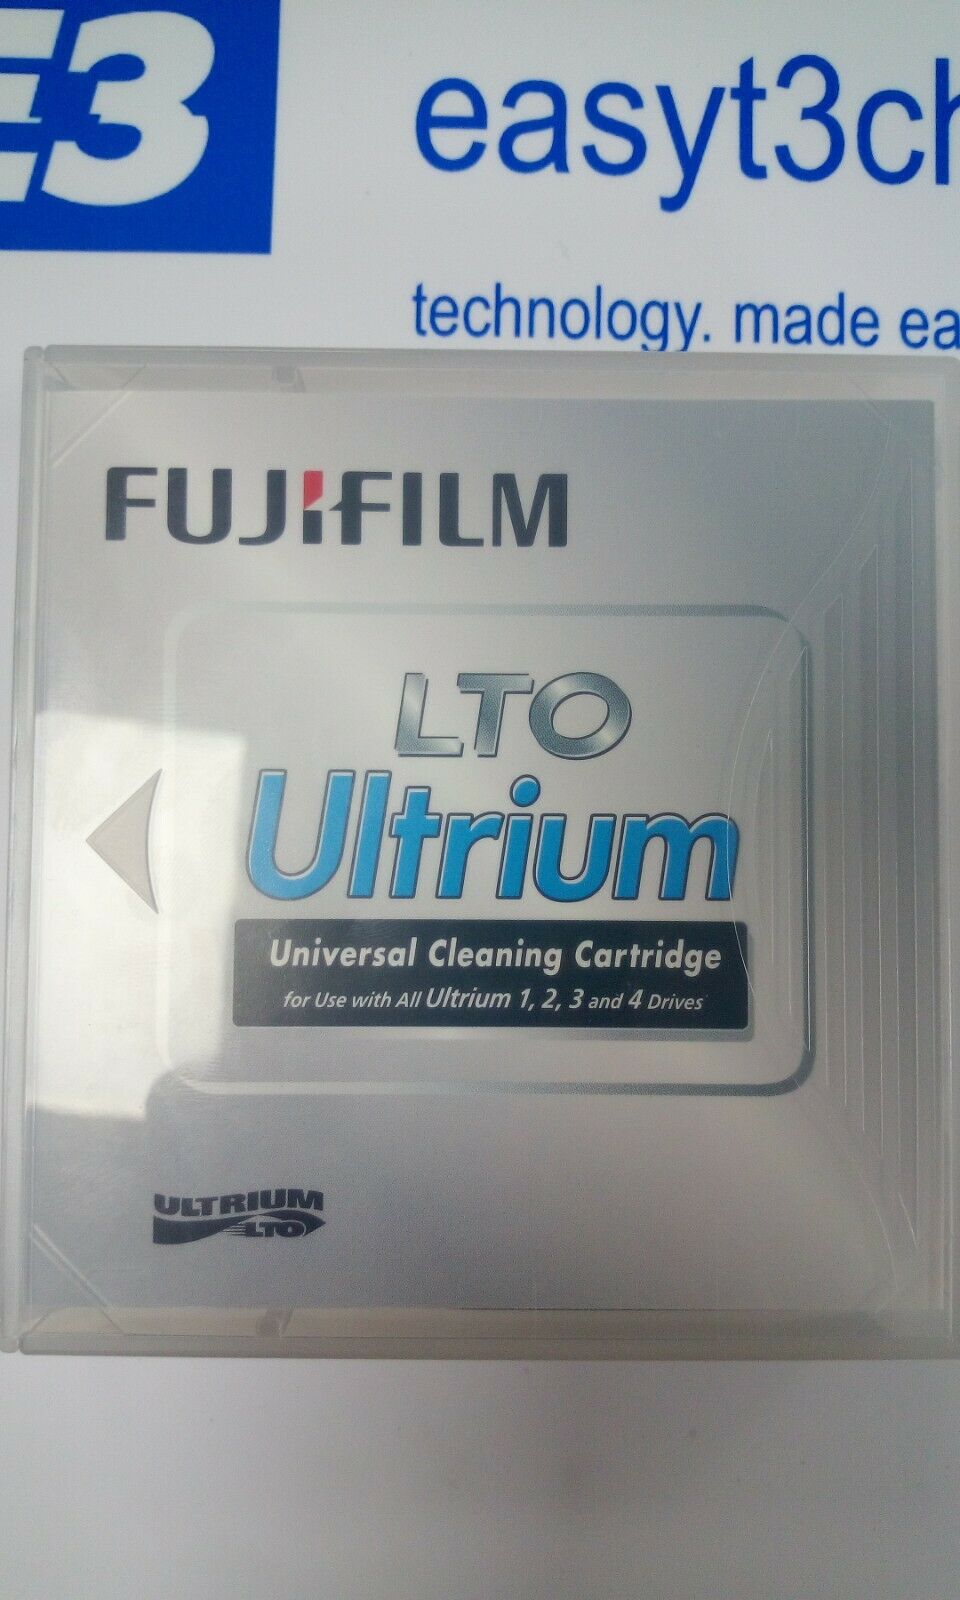 NEW! Fujifilm LTO Ultrium Universal Cleaning Cartridge for Drive 1 2 3 and 4